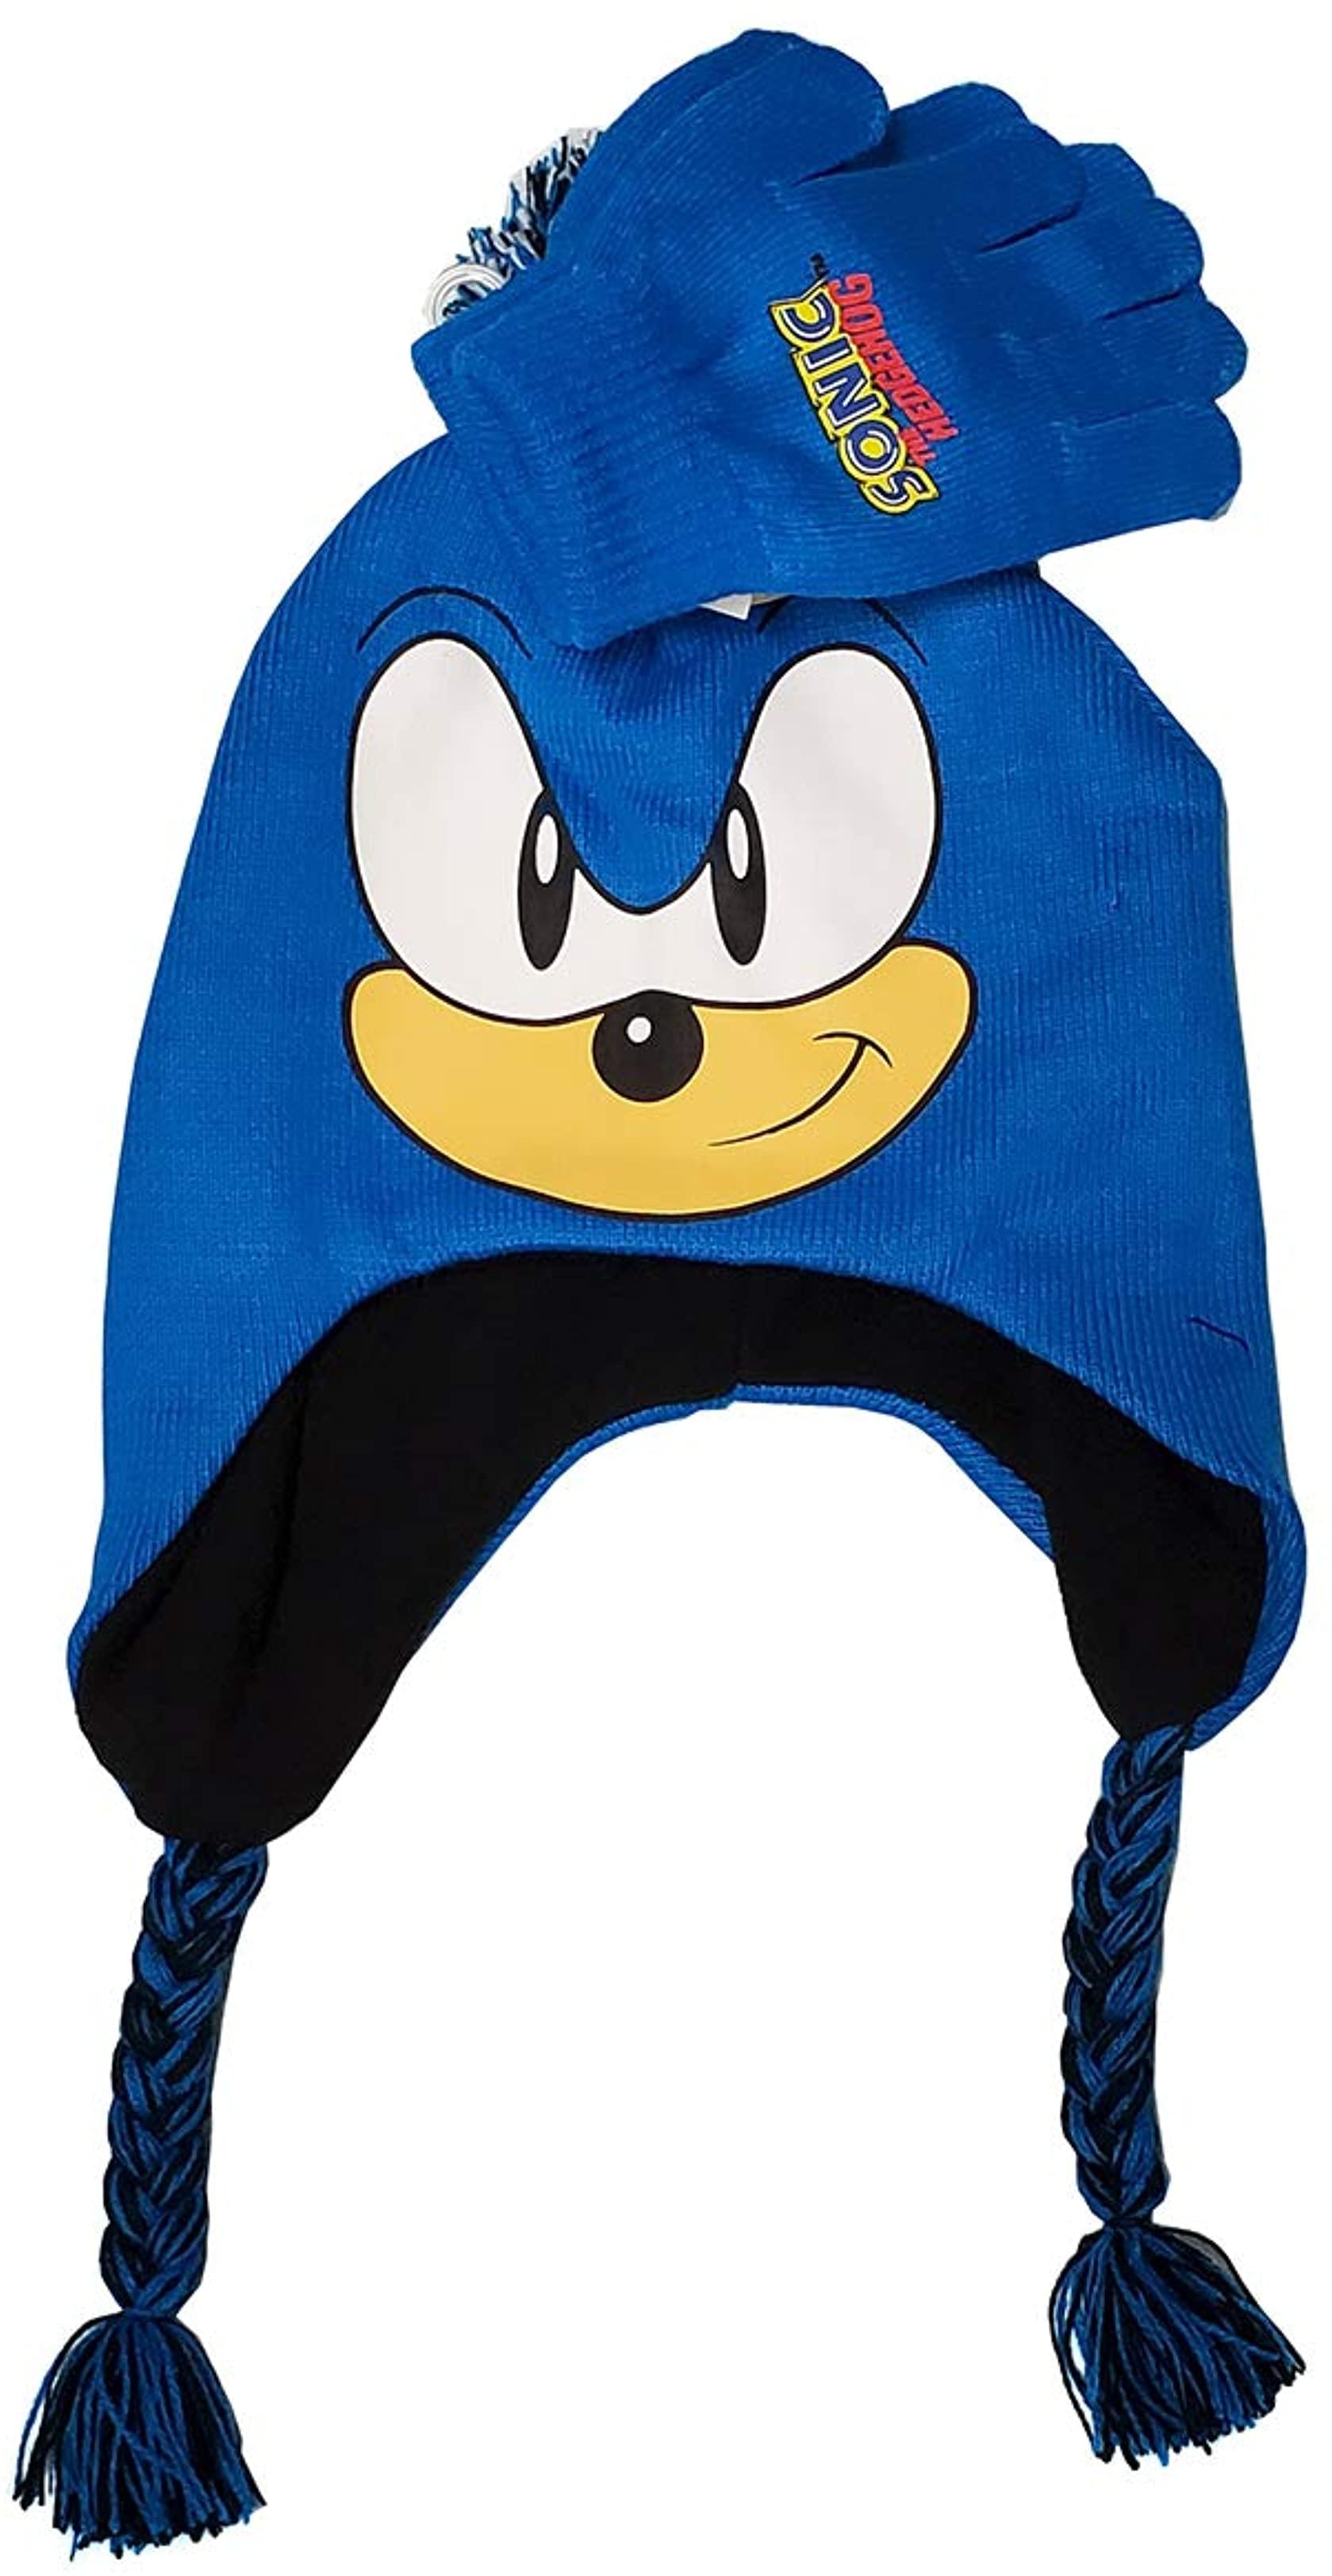 Sonic the Hedgehog Face Peruvian Hat and Glove Set